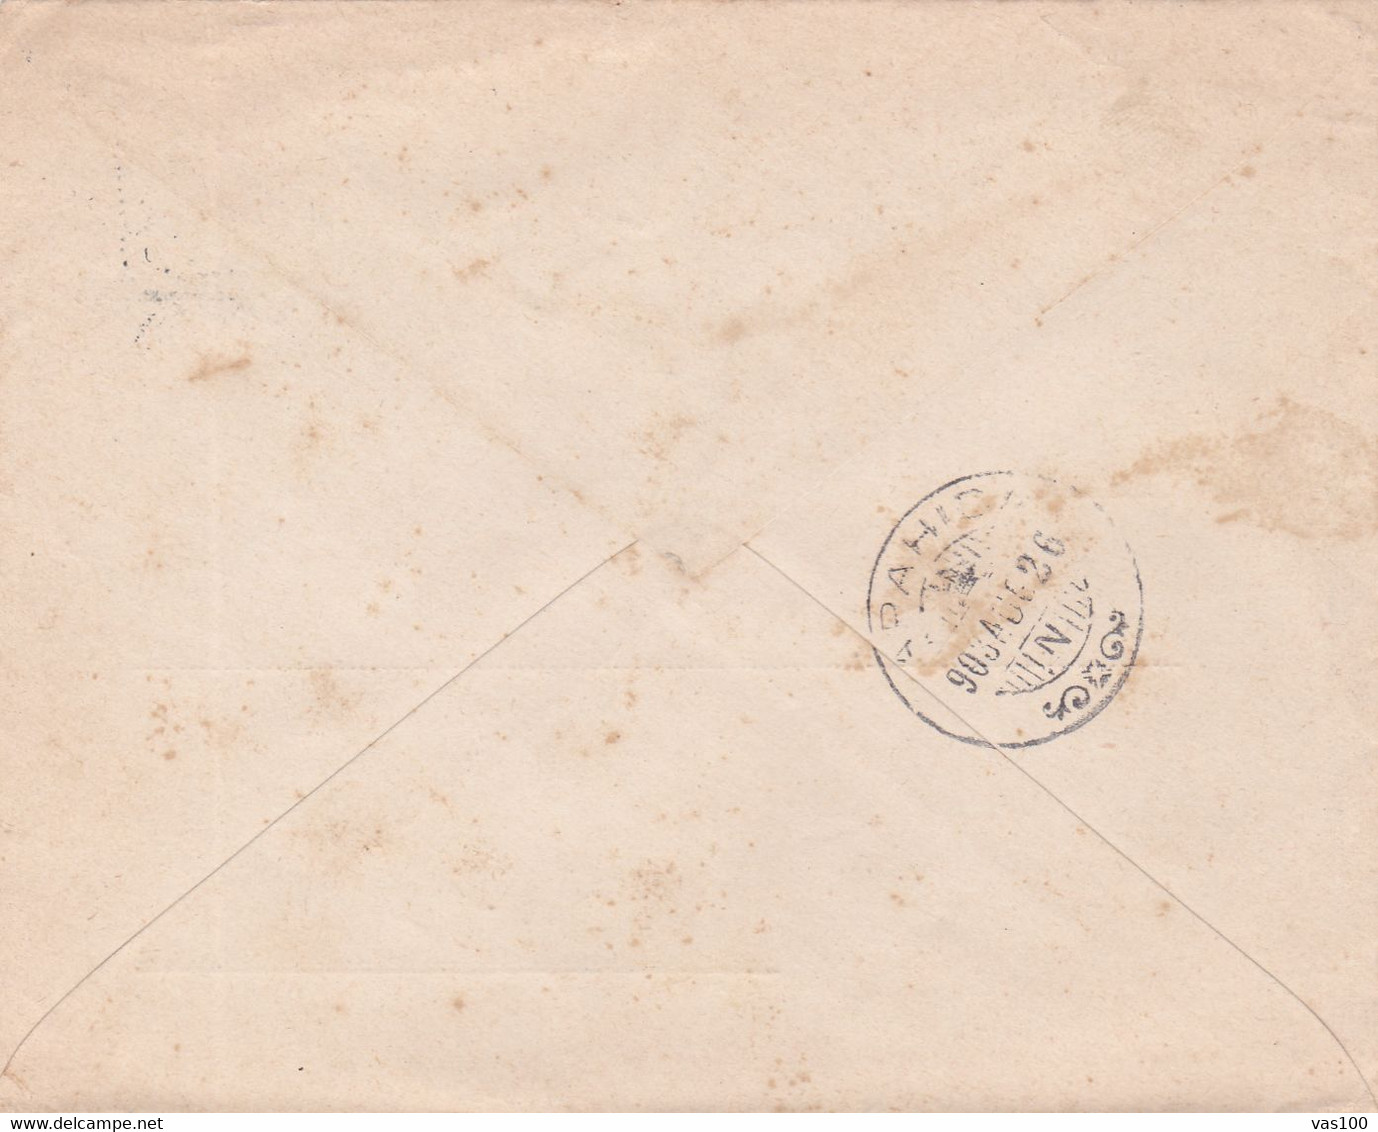 PERFINS PERFORE,HUNGARIA, COMMERCIAL PATENT SALGO TARJANI  "S T ", 1903 COVER TO APAHIDA ROMANIA. - Perfin